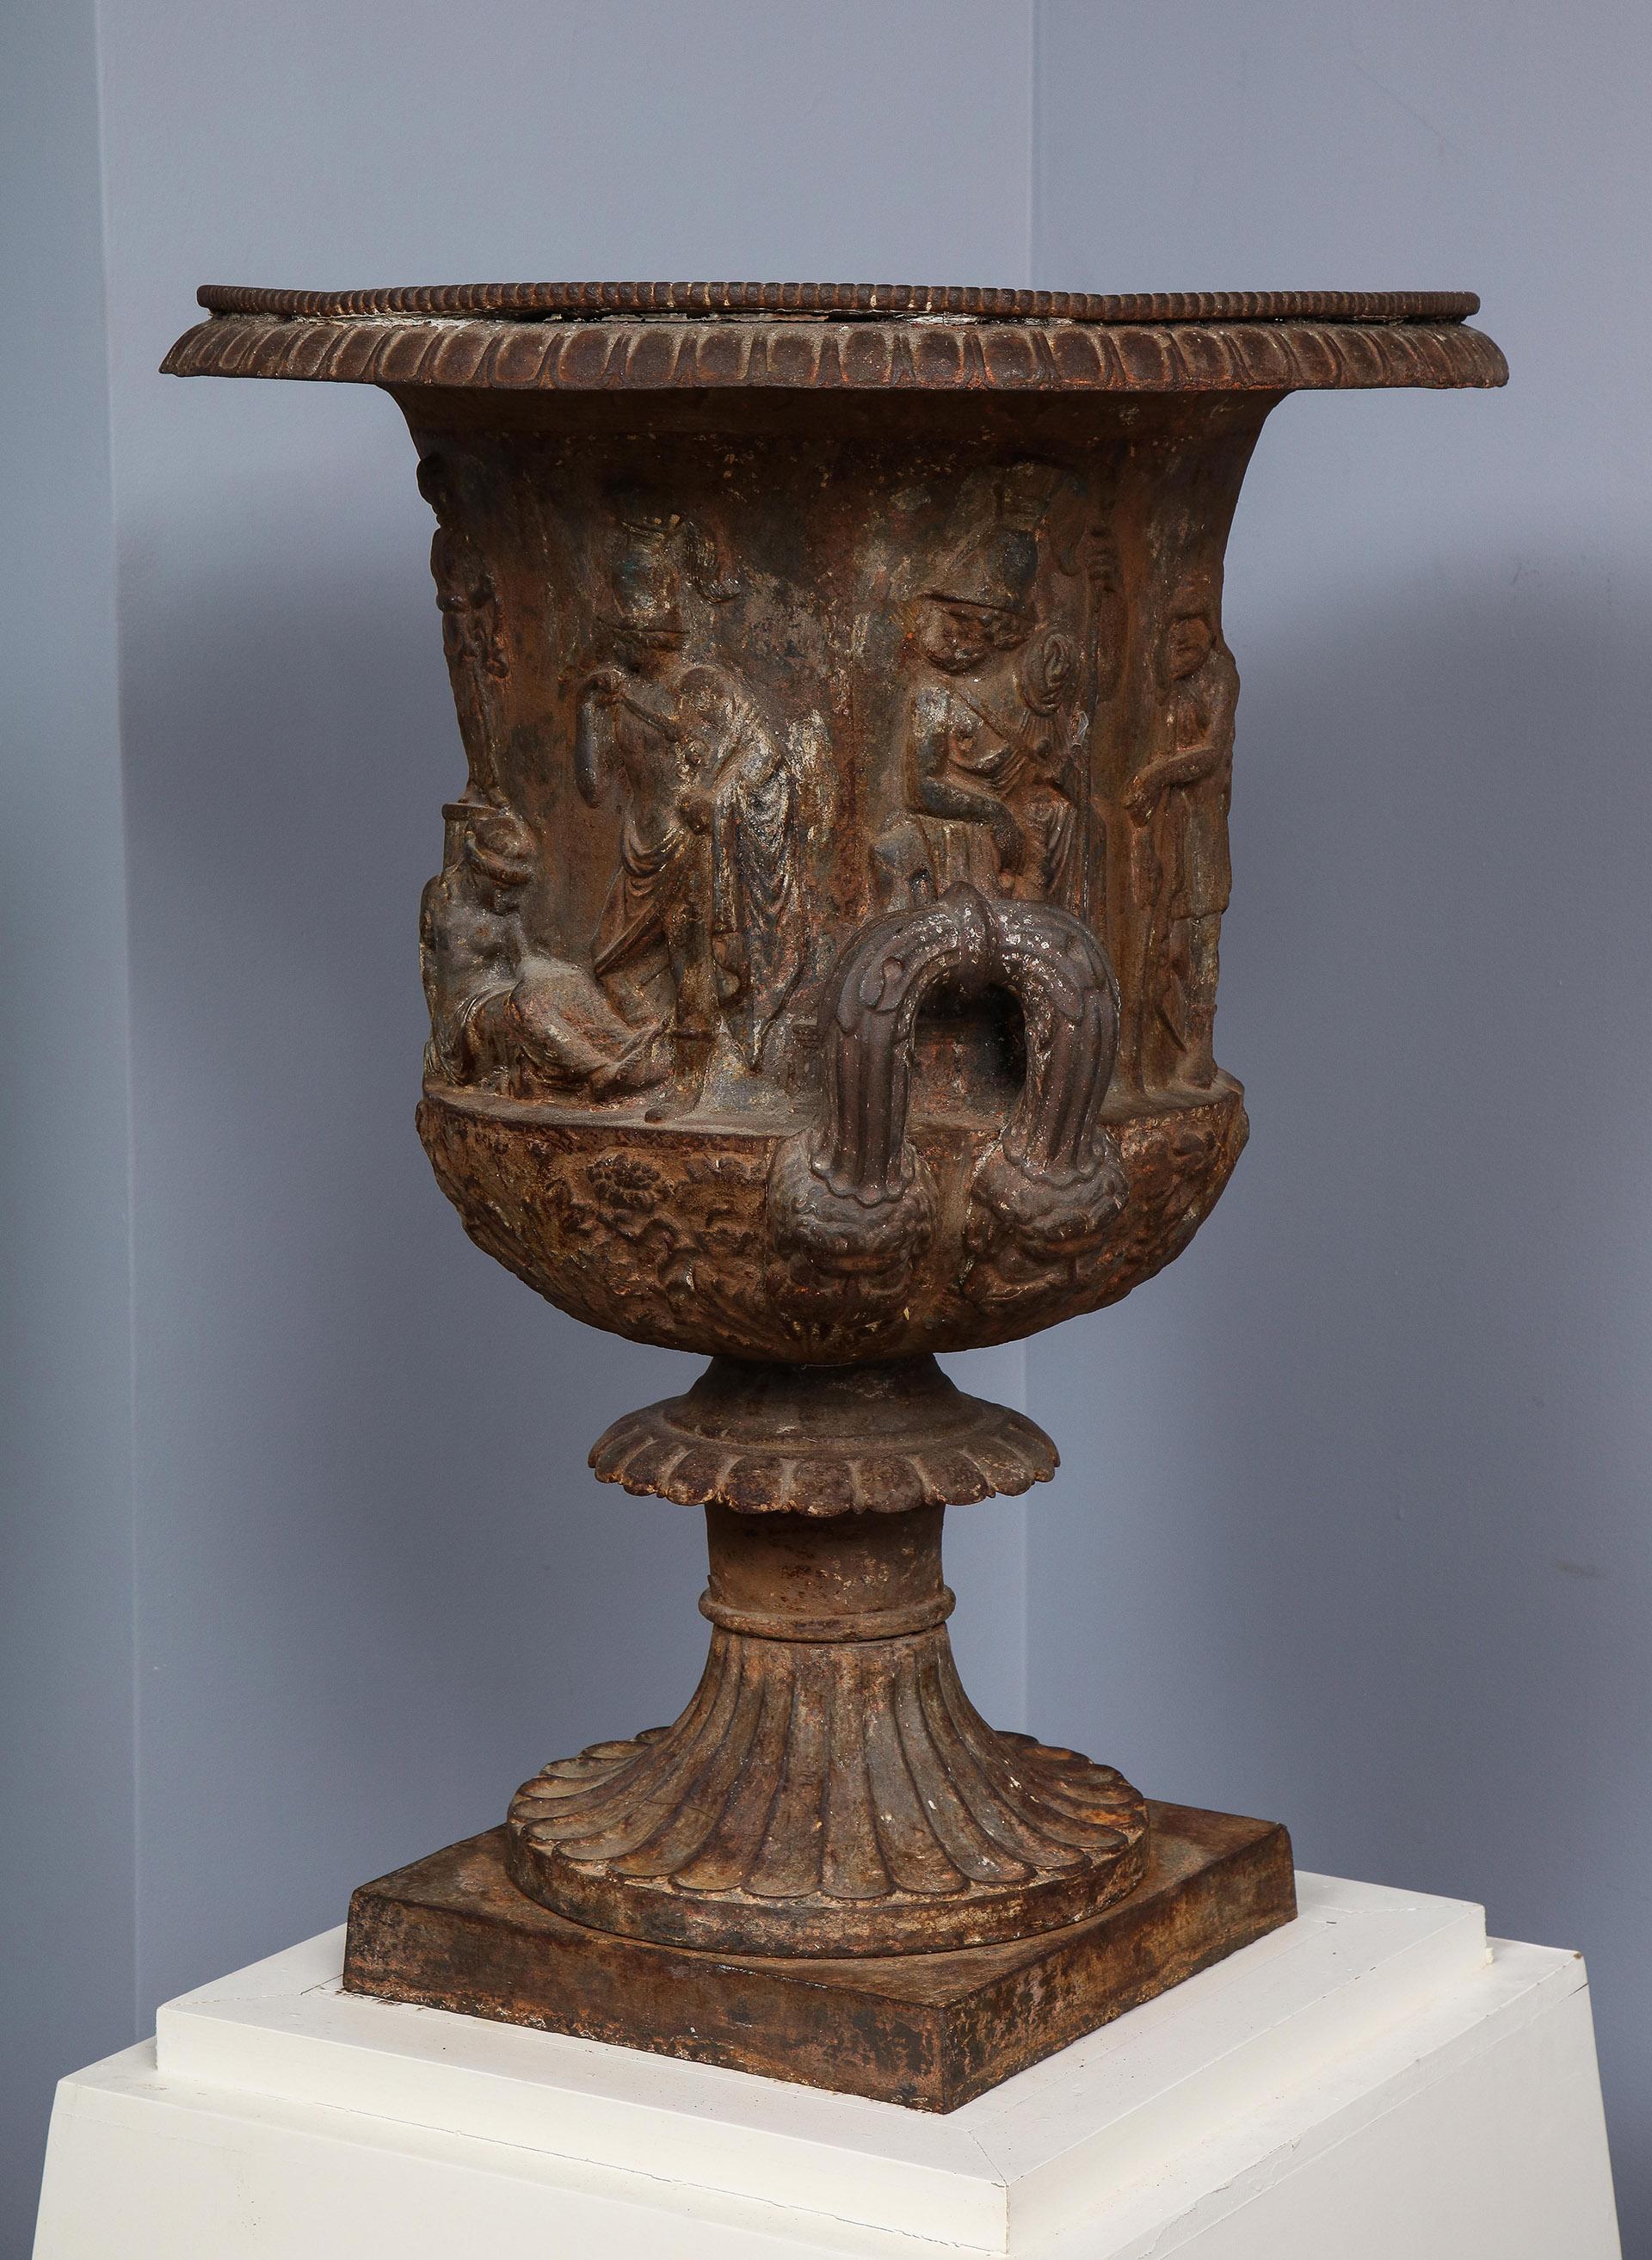 Iron Urn, after the Medici Urn in the Uffizi Gallery

Iron Urn after the Medici Urn in the Uffizi Gallery collection. Having a gadrooned lip, with a mythological bas-relief of a female figure seated below a statue of a goddess on a high plinth,